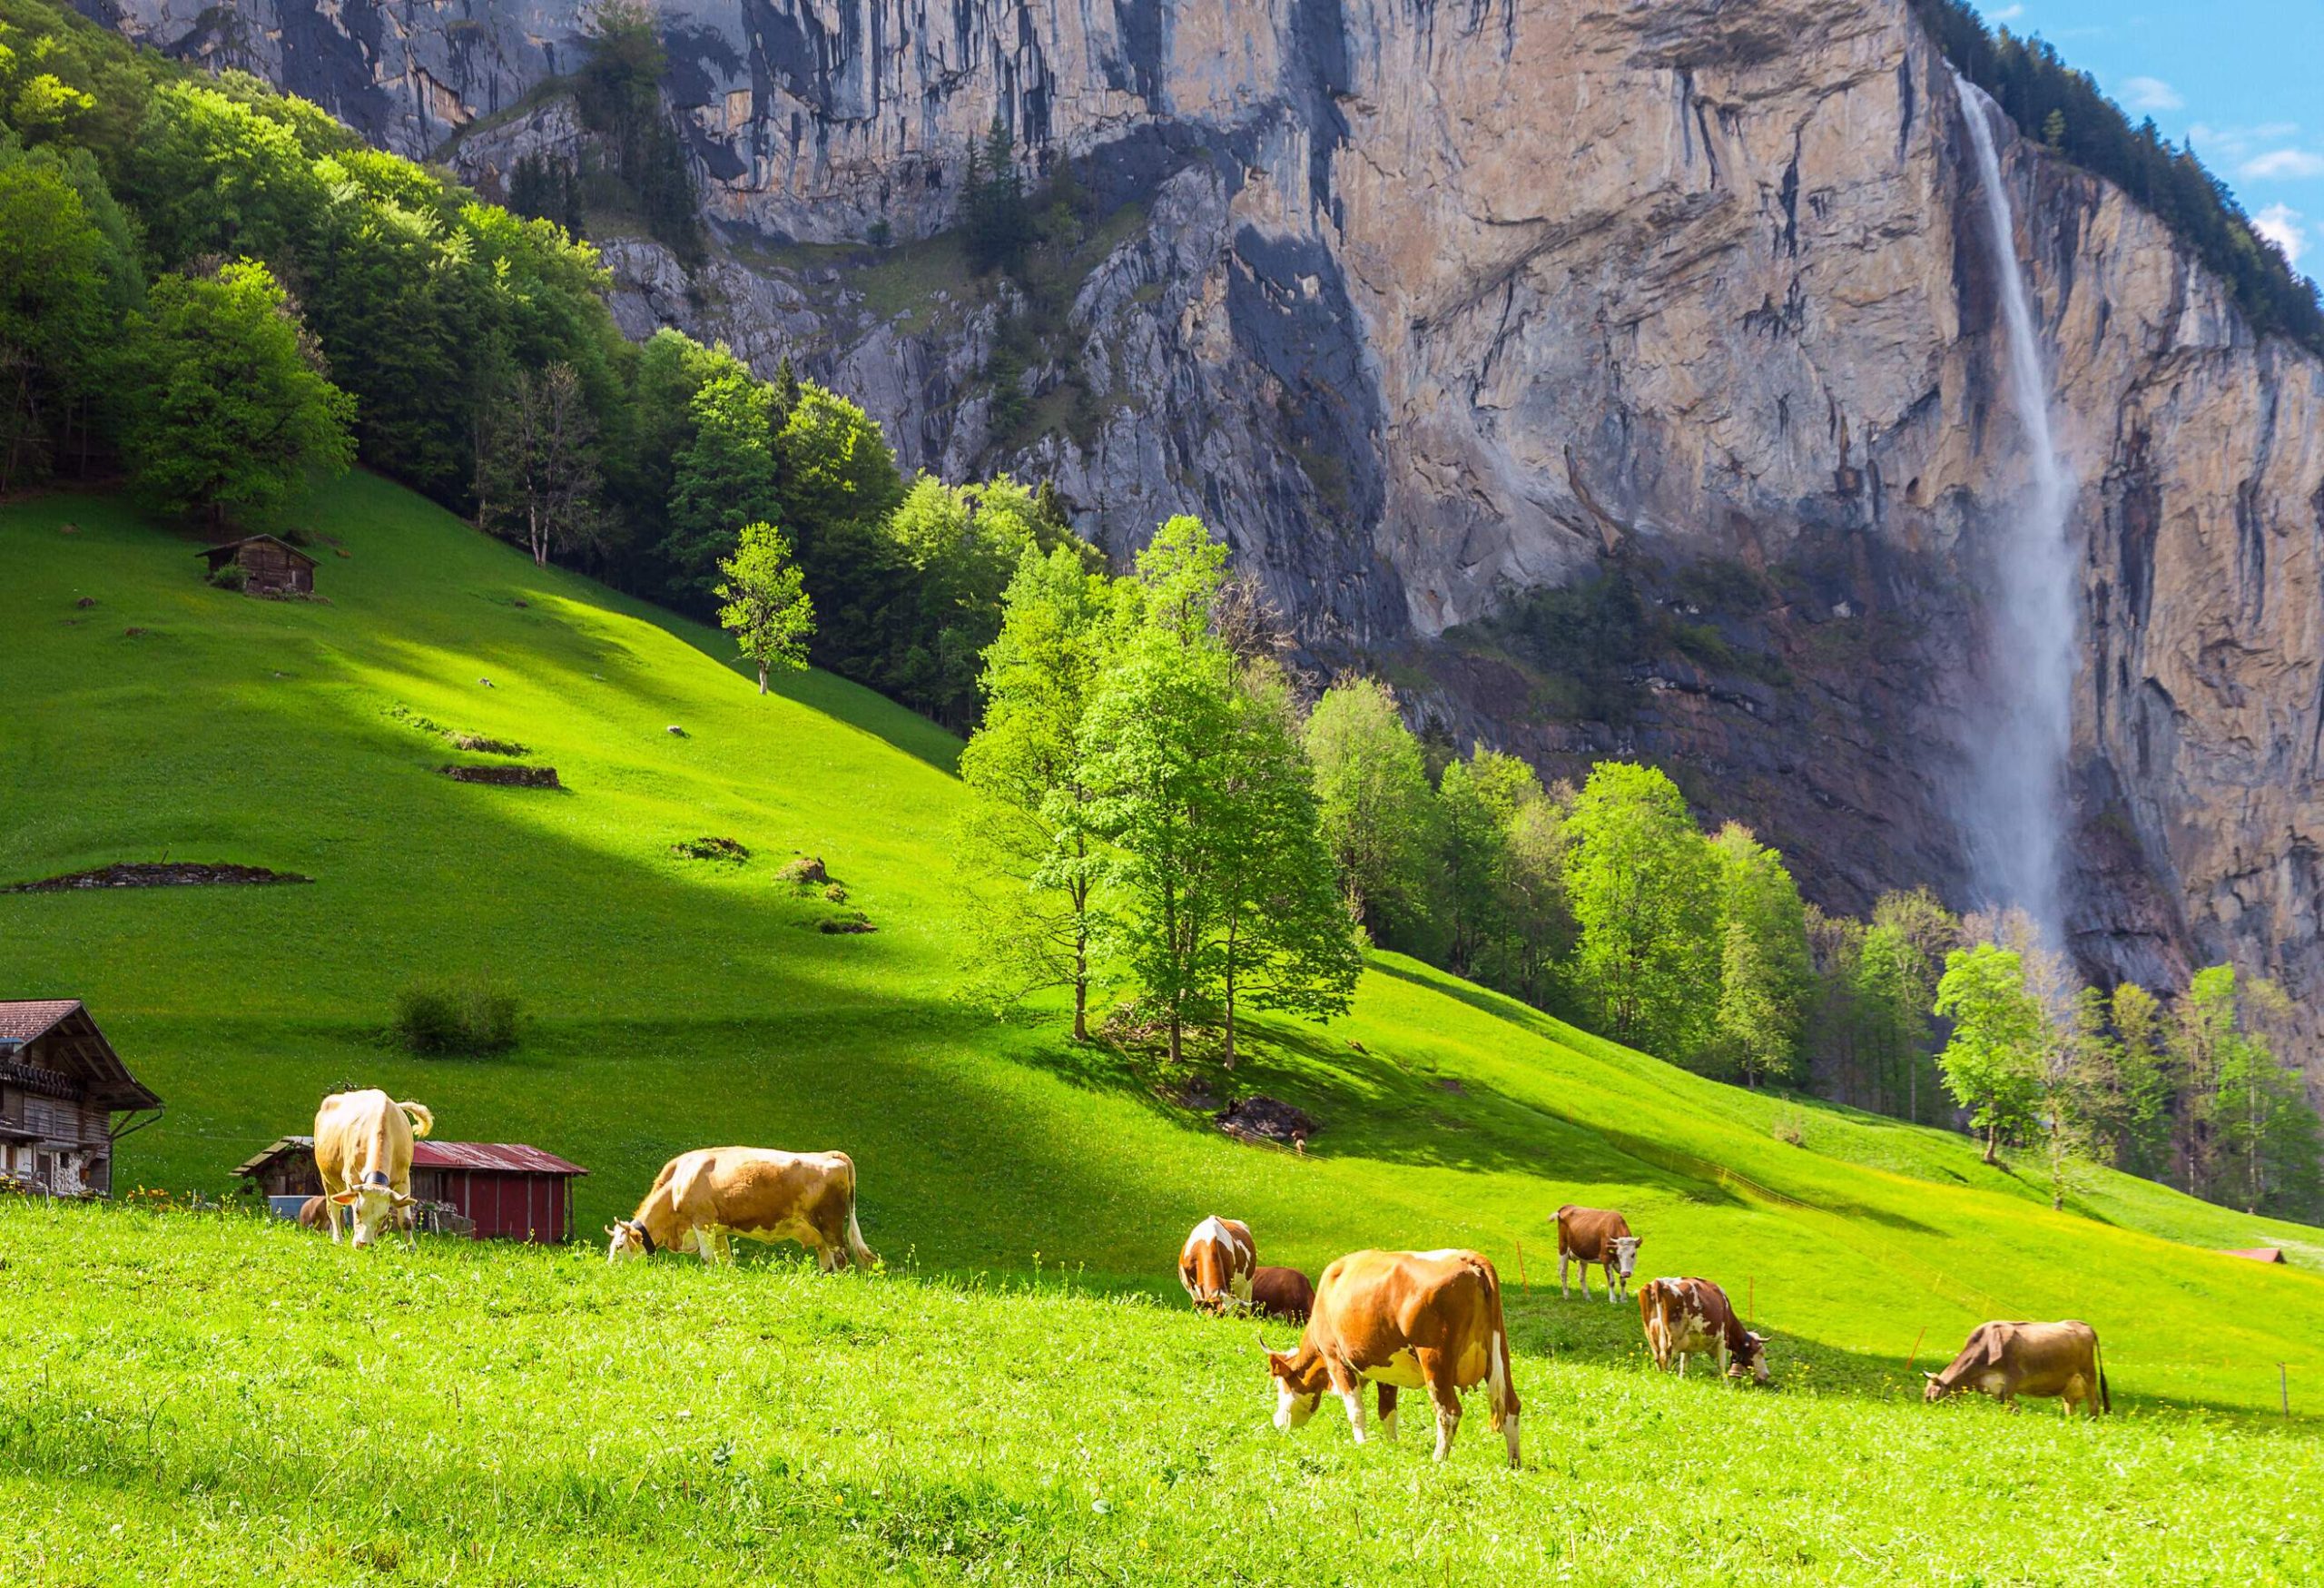 A herd of cattle graze contentedly on fresh green mountain pastures, whilst the stunning backdrop of a cliff with a cascading waterfall enhances the serene and picturesque scene.